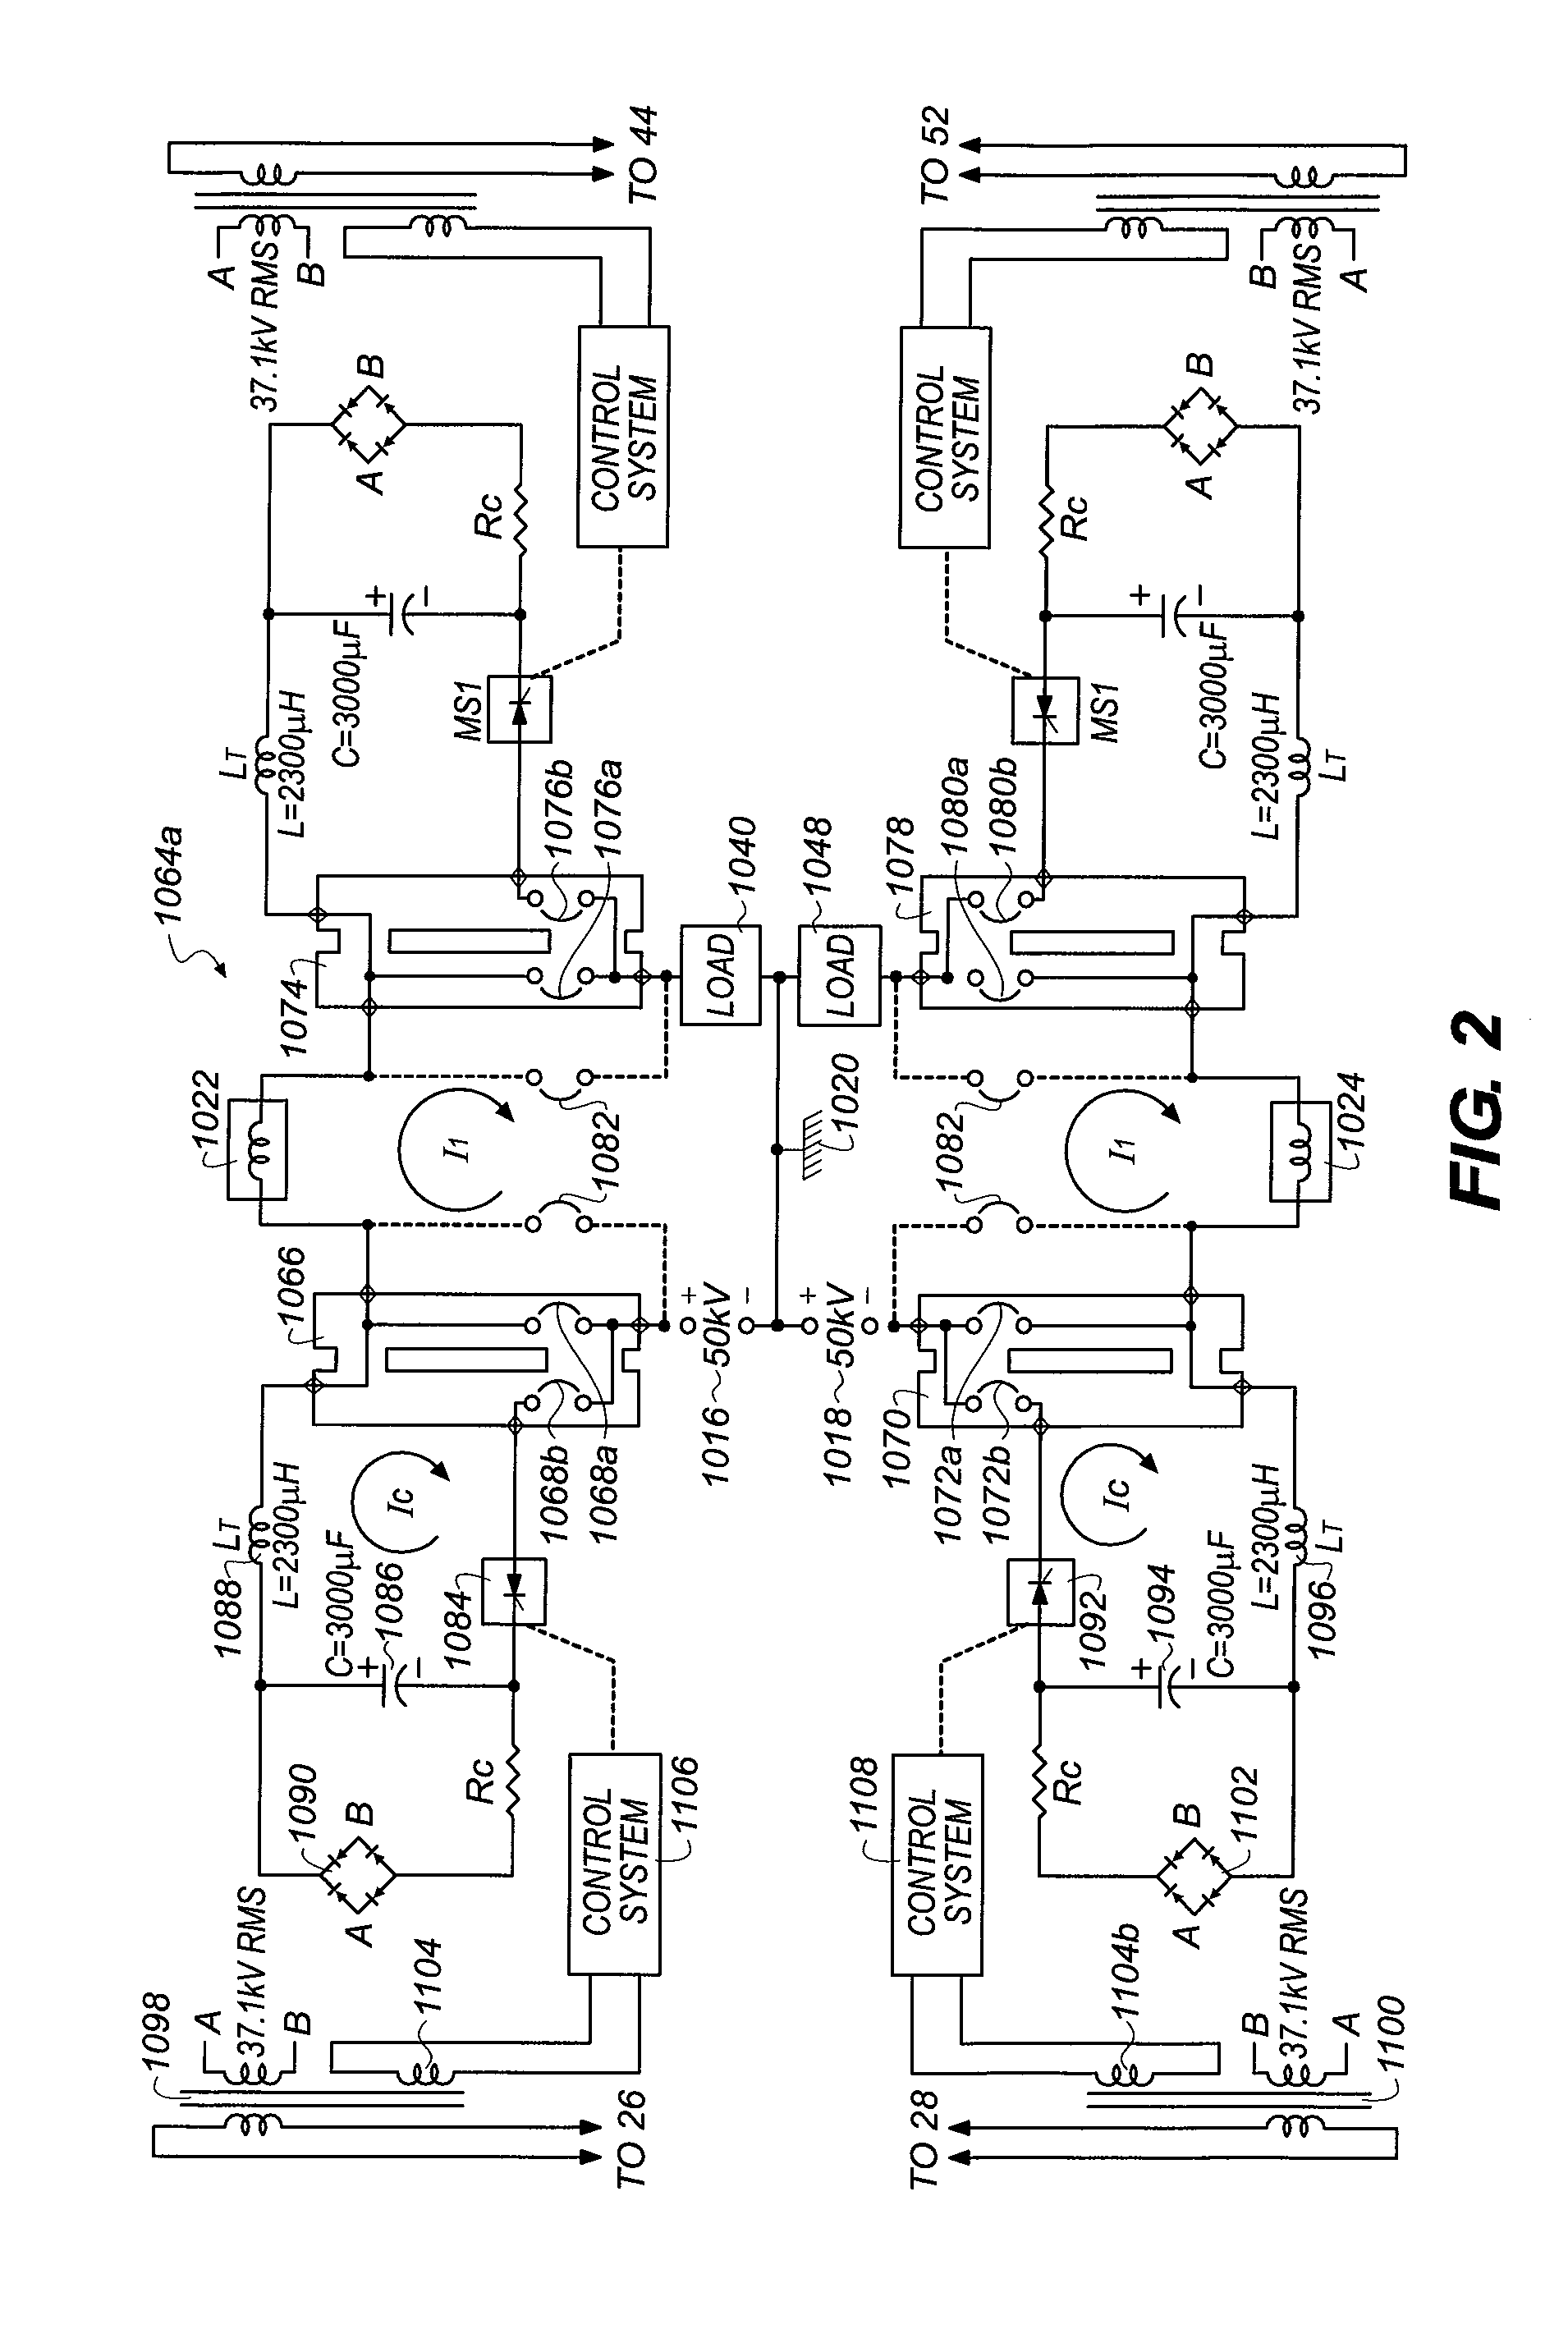 Superconducting direct current transmission system